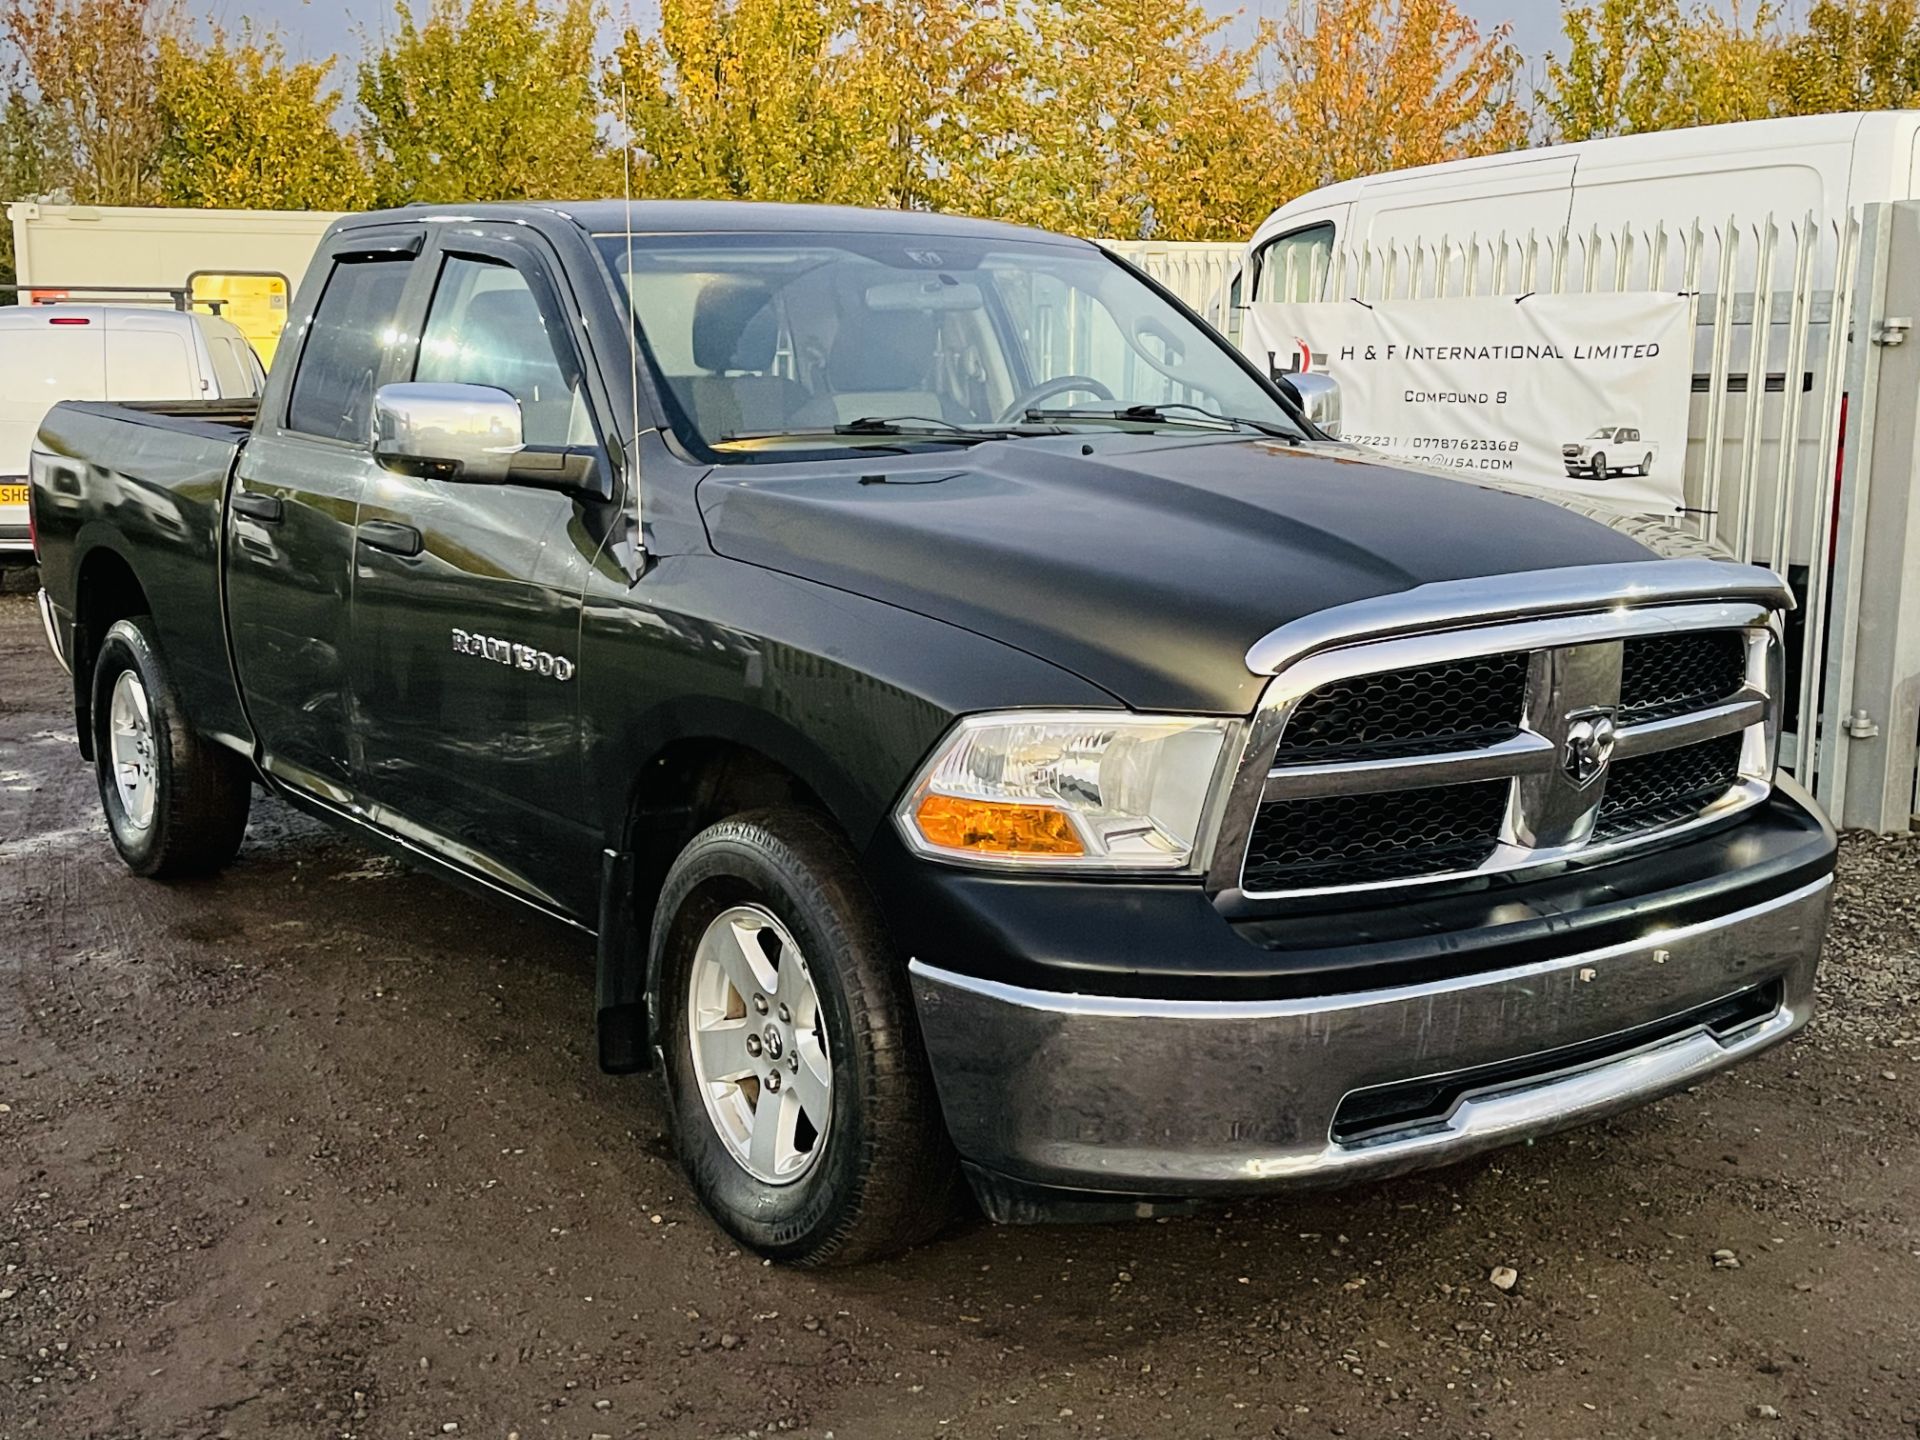 ** ON SALE **Dodge Ram 4.7 V8 1500 ST 4WD ' 2012 Year ' A/C - Cruise Control - 6 Seats Chrome Pack - Image 6 of 27